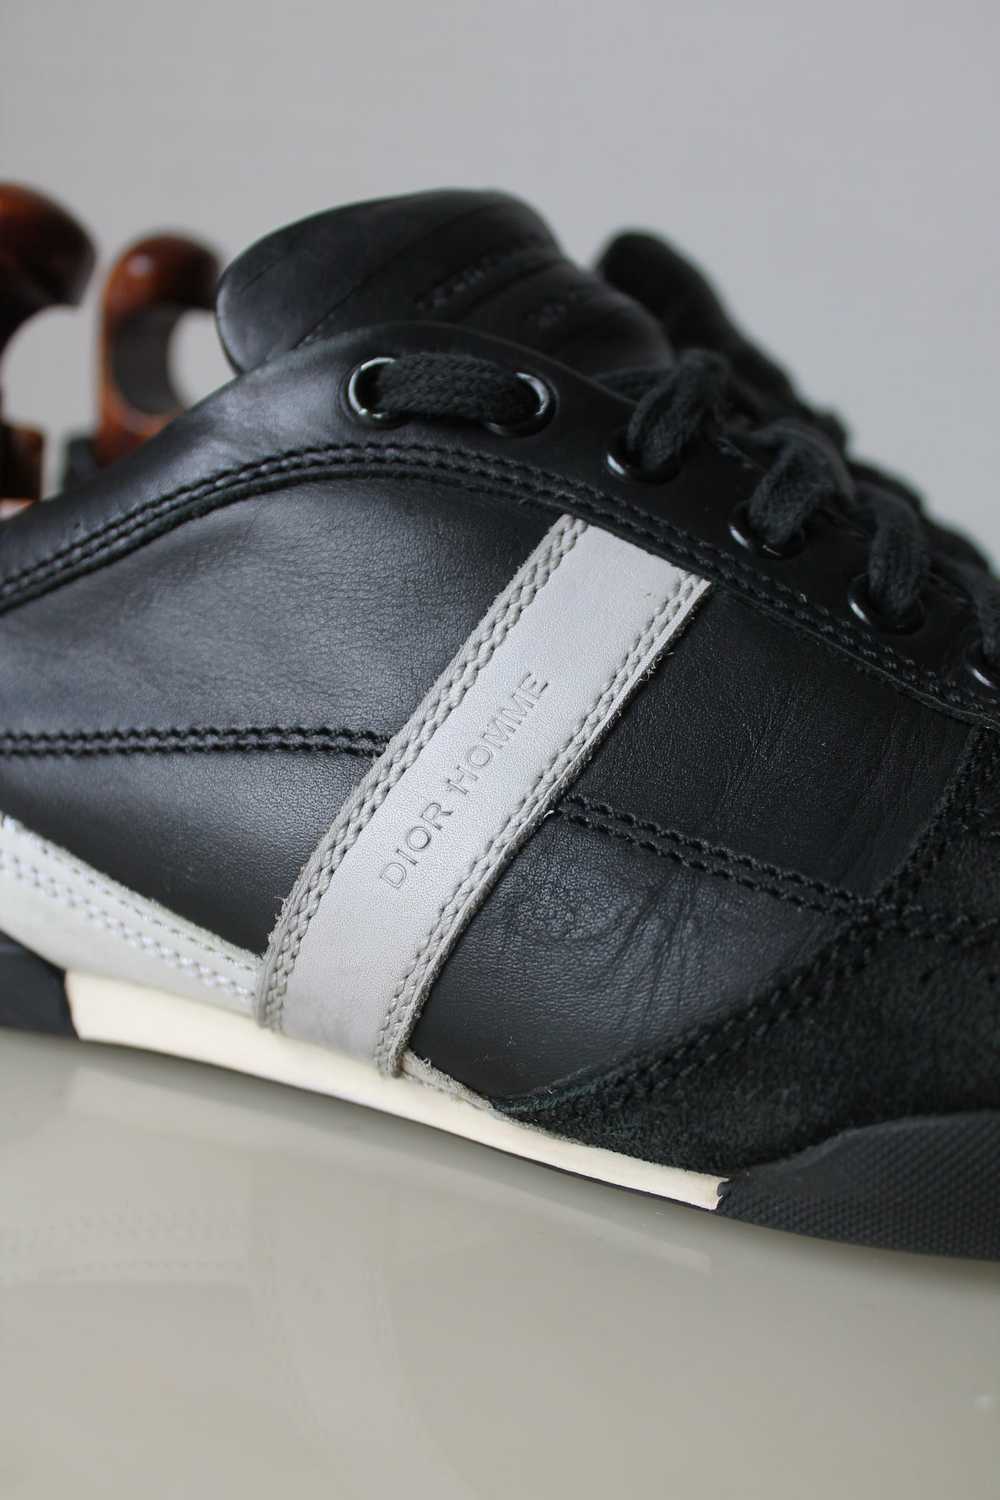 Dior DIOR HOMME Leather Low Top Sneakers Black - image 9